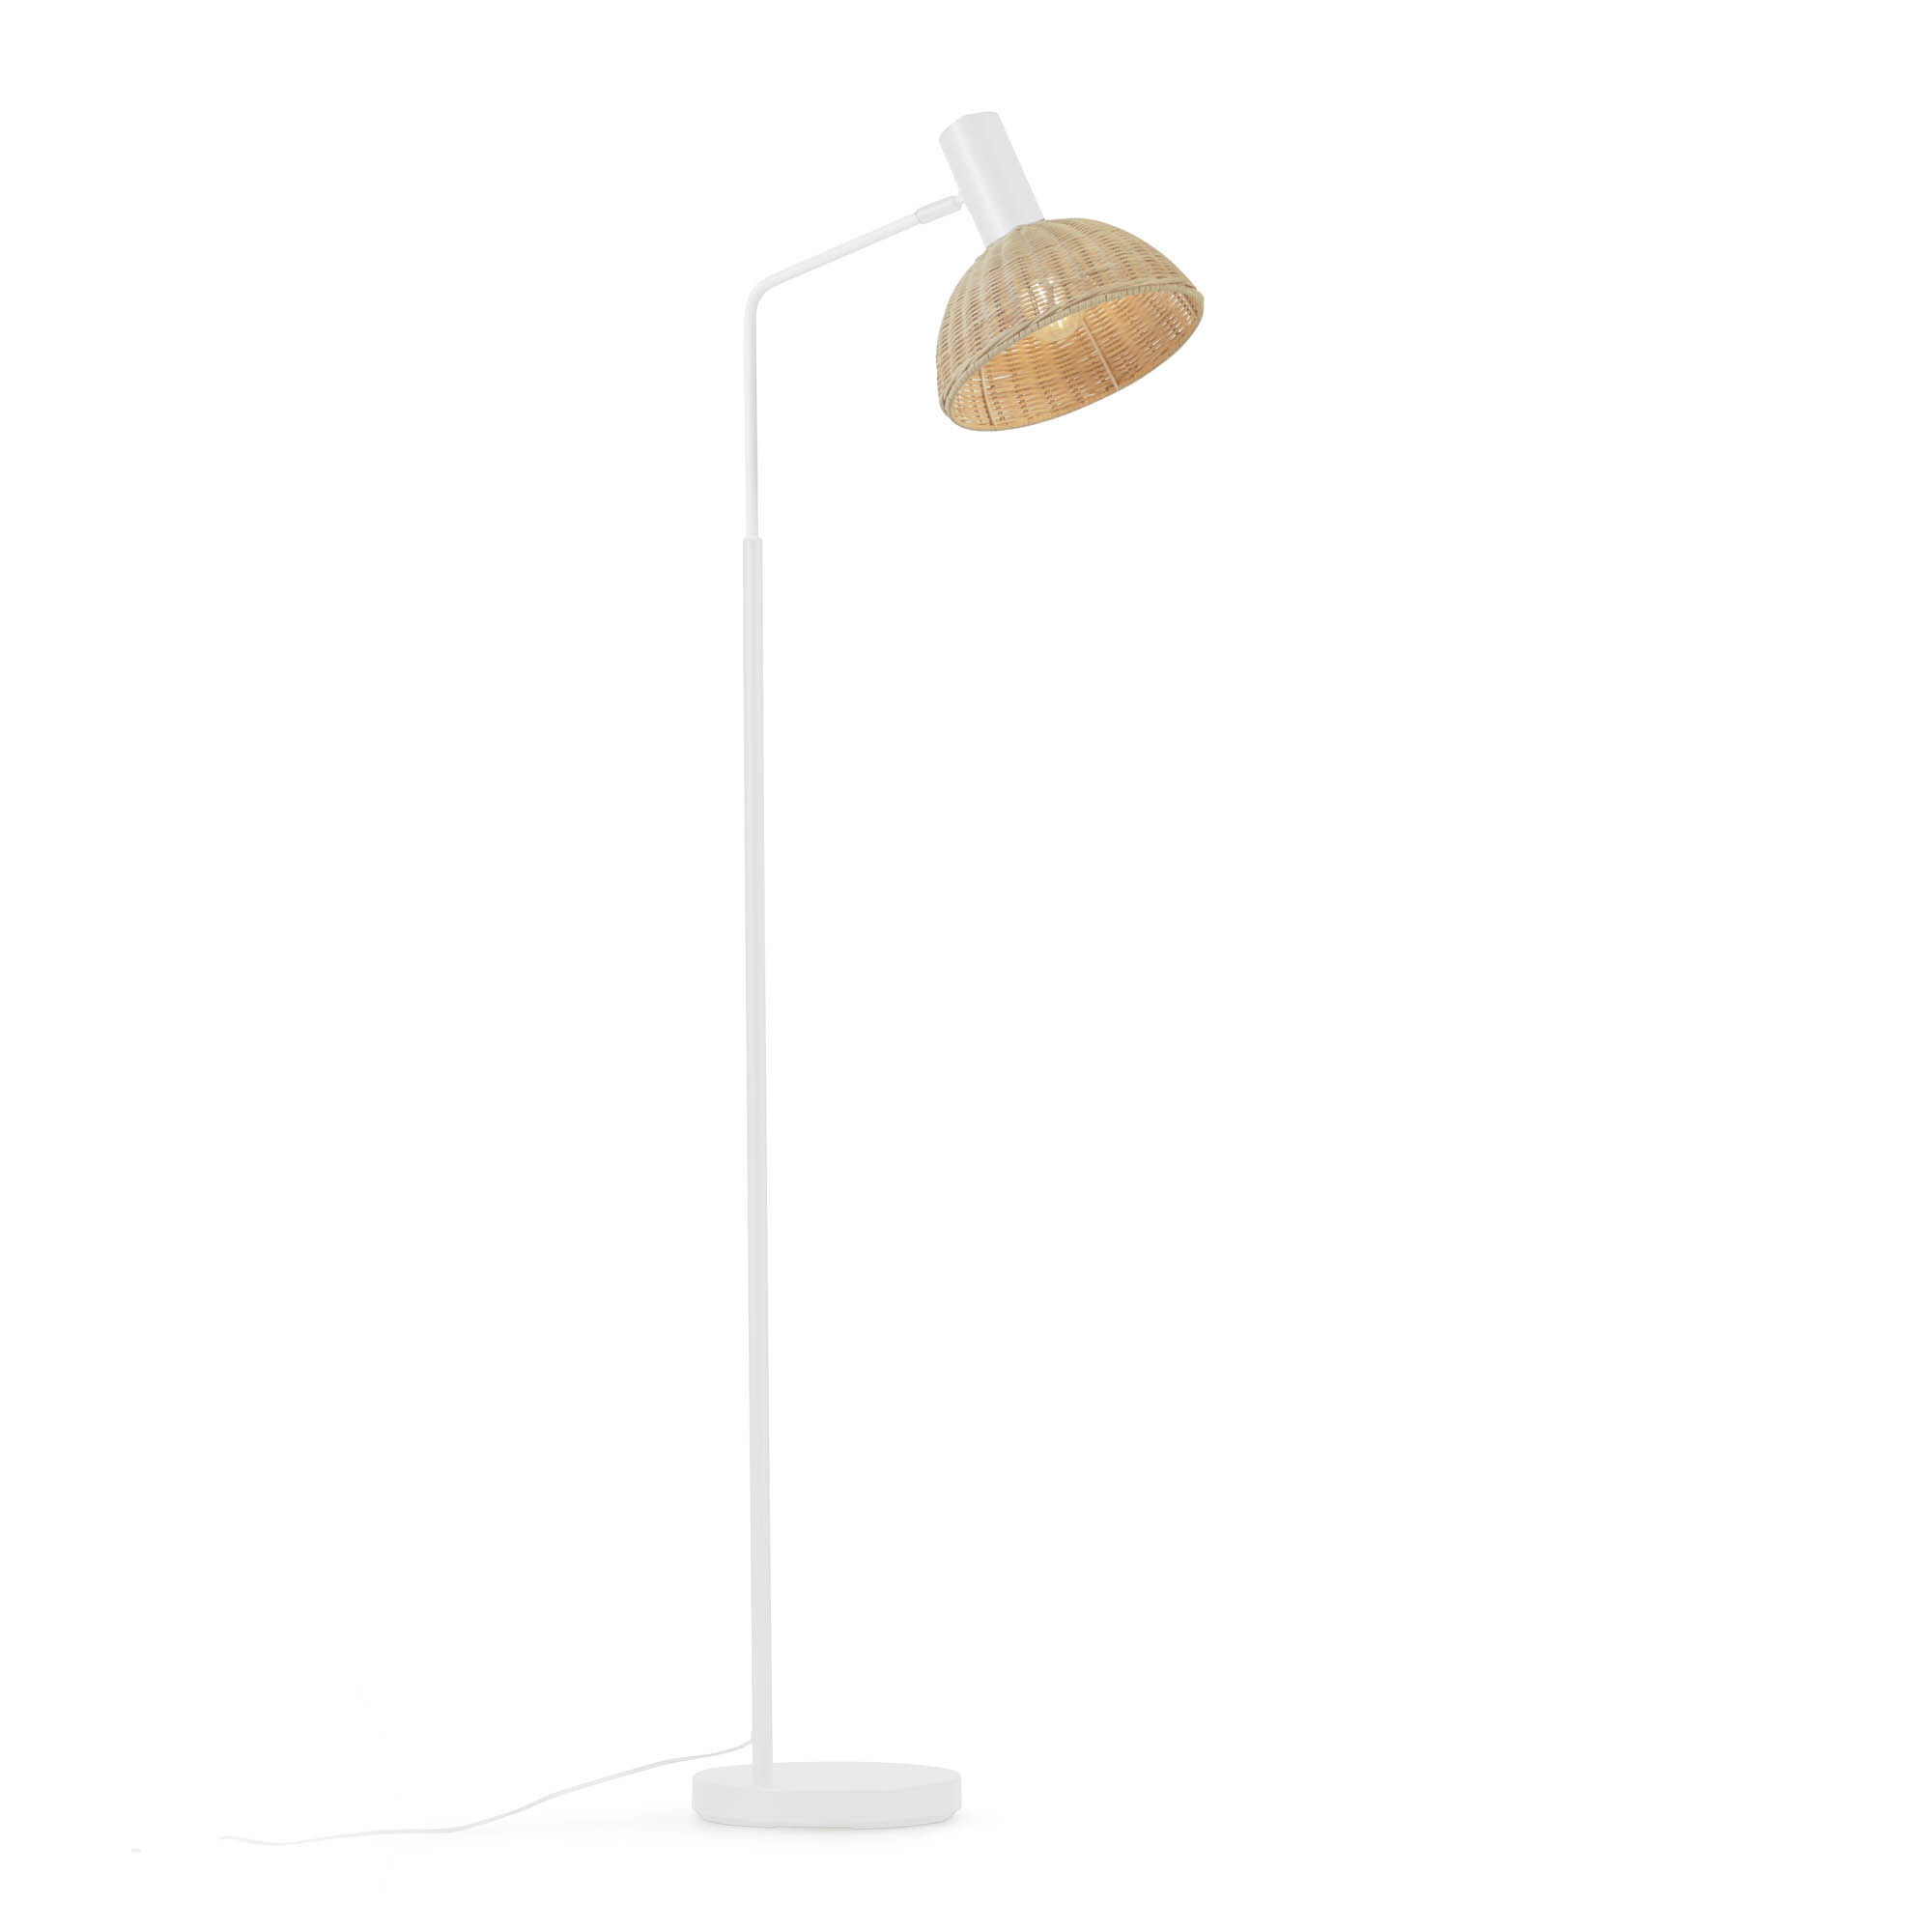 Kave Home Damila floor lamp in metal with white finish and rattan with natural finish